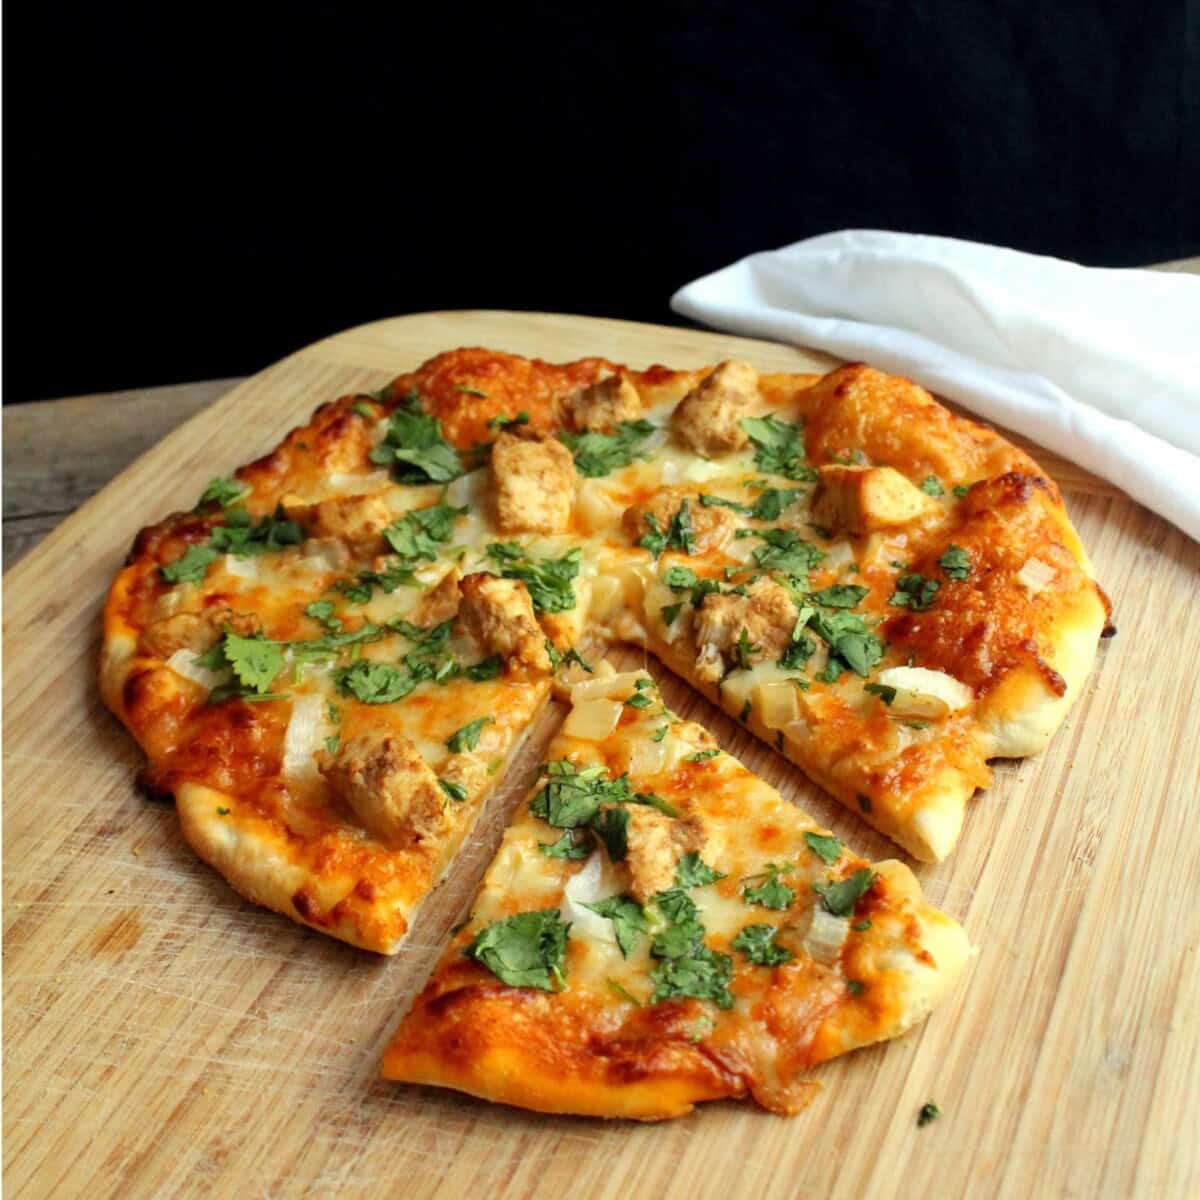 A chicken tikka masala pizza on a wooden cutting board with a slice cut out.